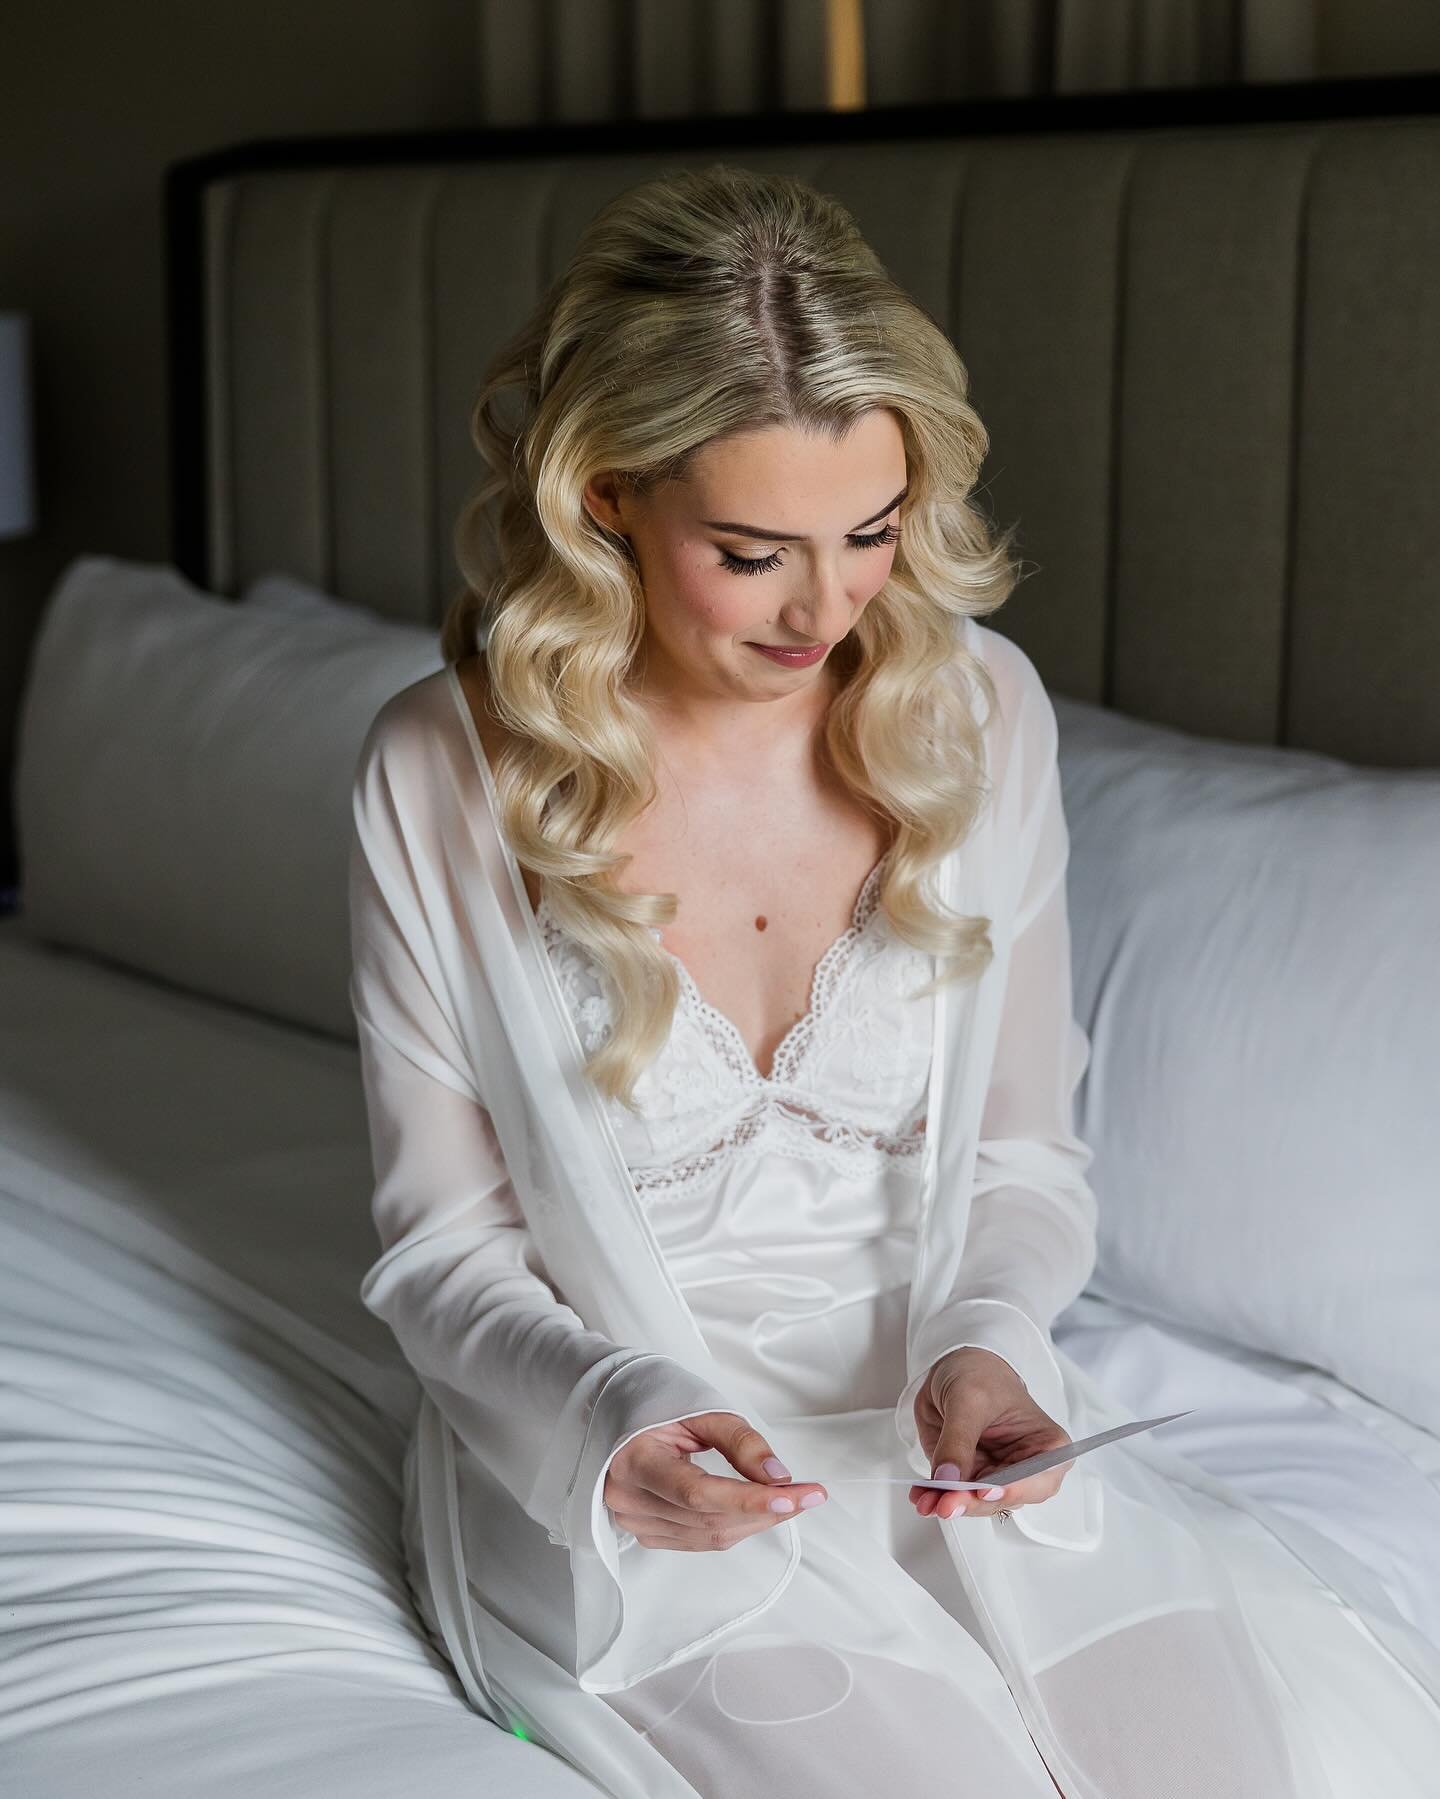 Getting ready moments are some of my favorite. The calm before heading off to get married and what will be a whirlwind of an amazing day. Cherish these slower moments as the rest of your wedding will fly by! 

Westchester wedding photographer | New Y